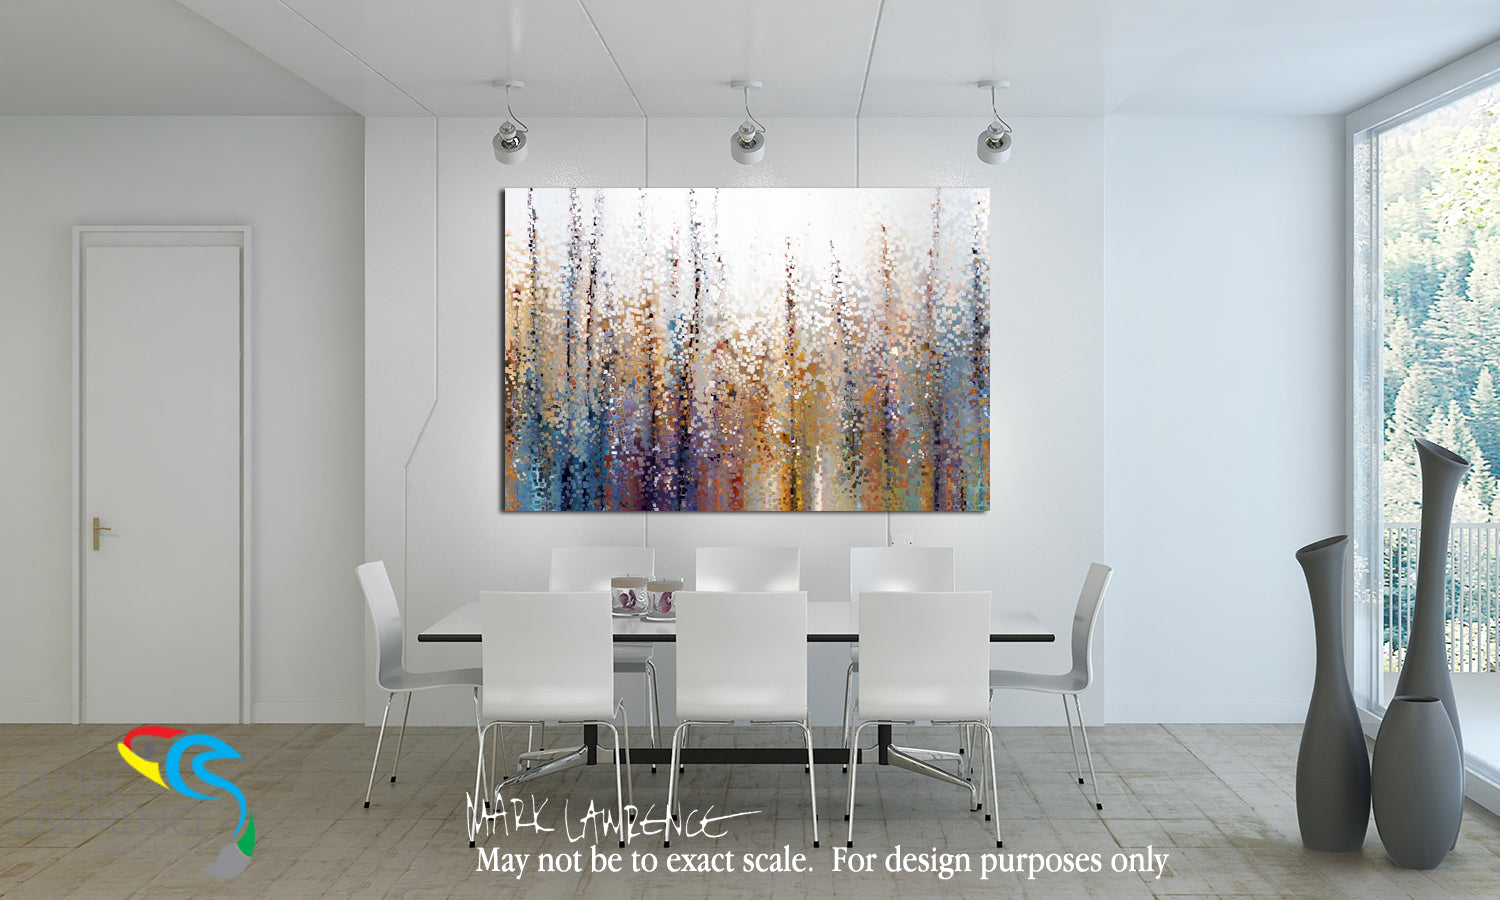 Interior Designer Inspiration- Luke 11:28. Obedience Brings Blessing. Limited Edition Christian Modern Art. Hand embellished & textured giclee paintings with bold brush strokes by the artist. Signed & numbered. Museum quality on canvas wall art prints. But He said, “More than that, blessed are those who hear the word of God and keep it!” Luke 11:28